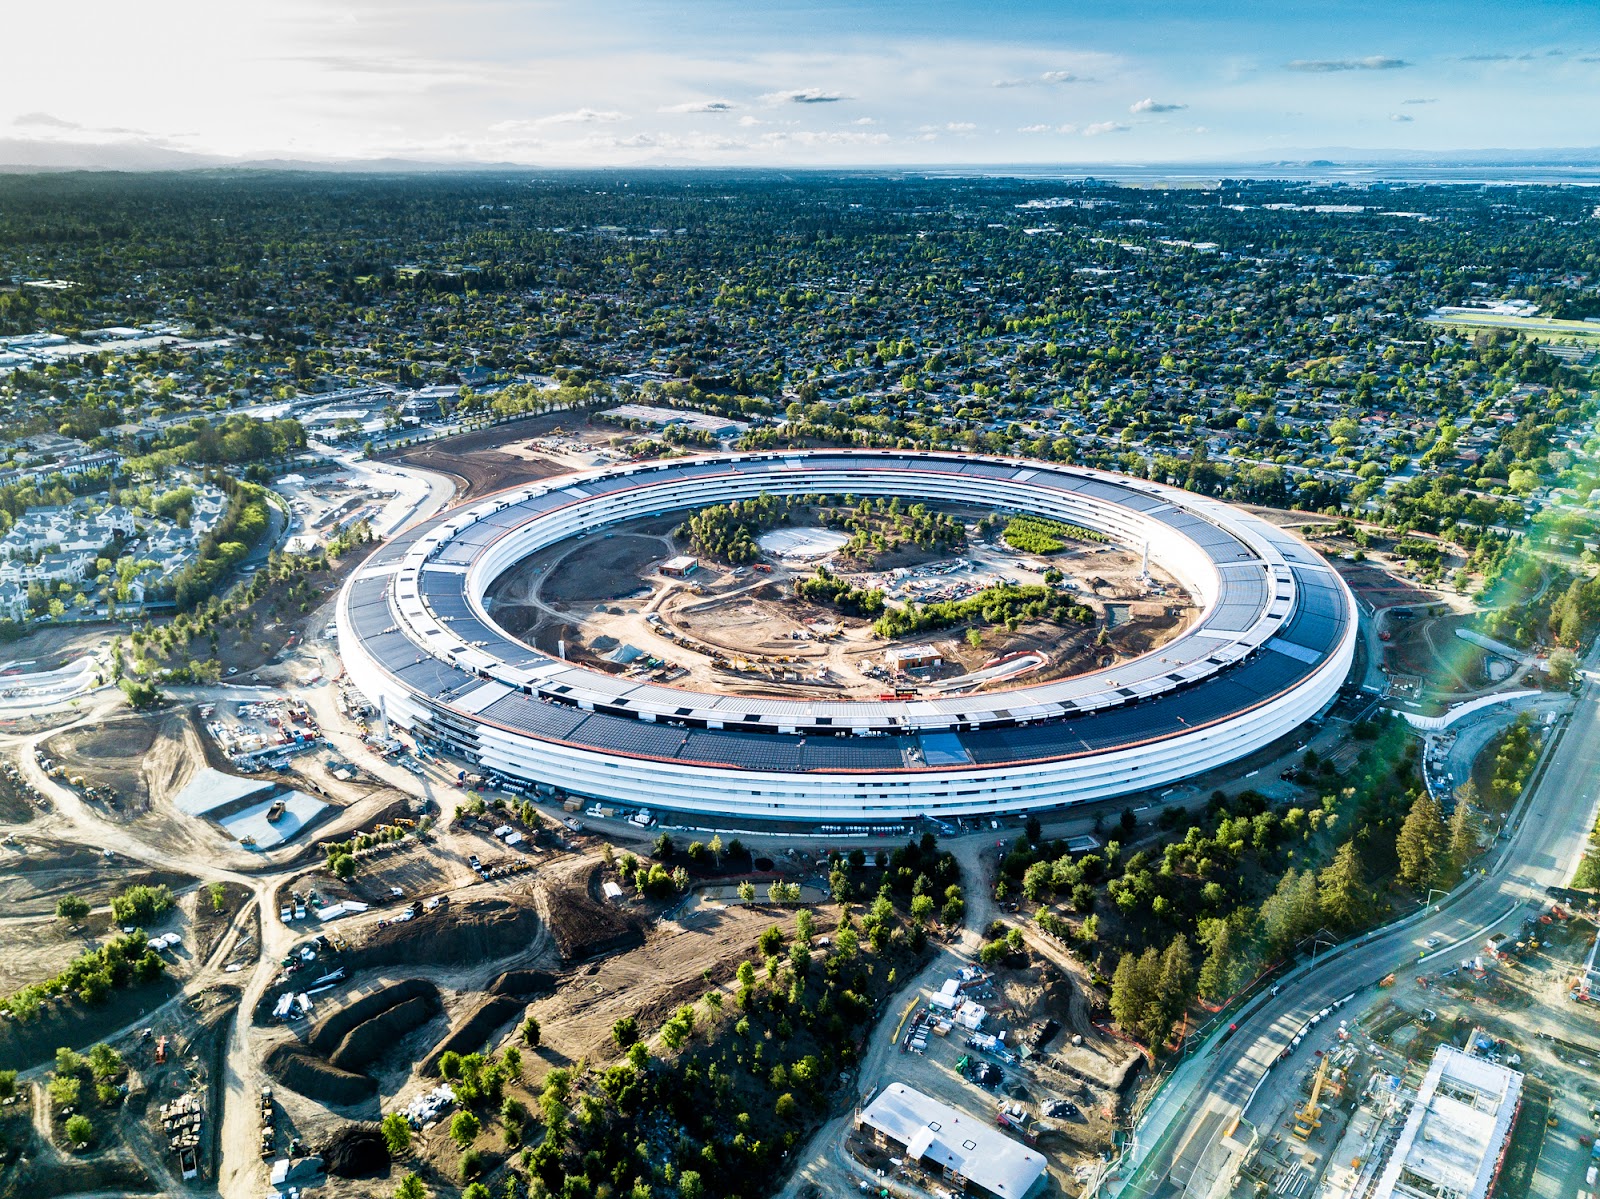 Aerial view of Apple Park in Cupertino, California